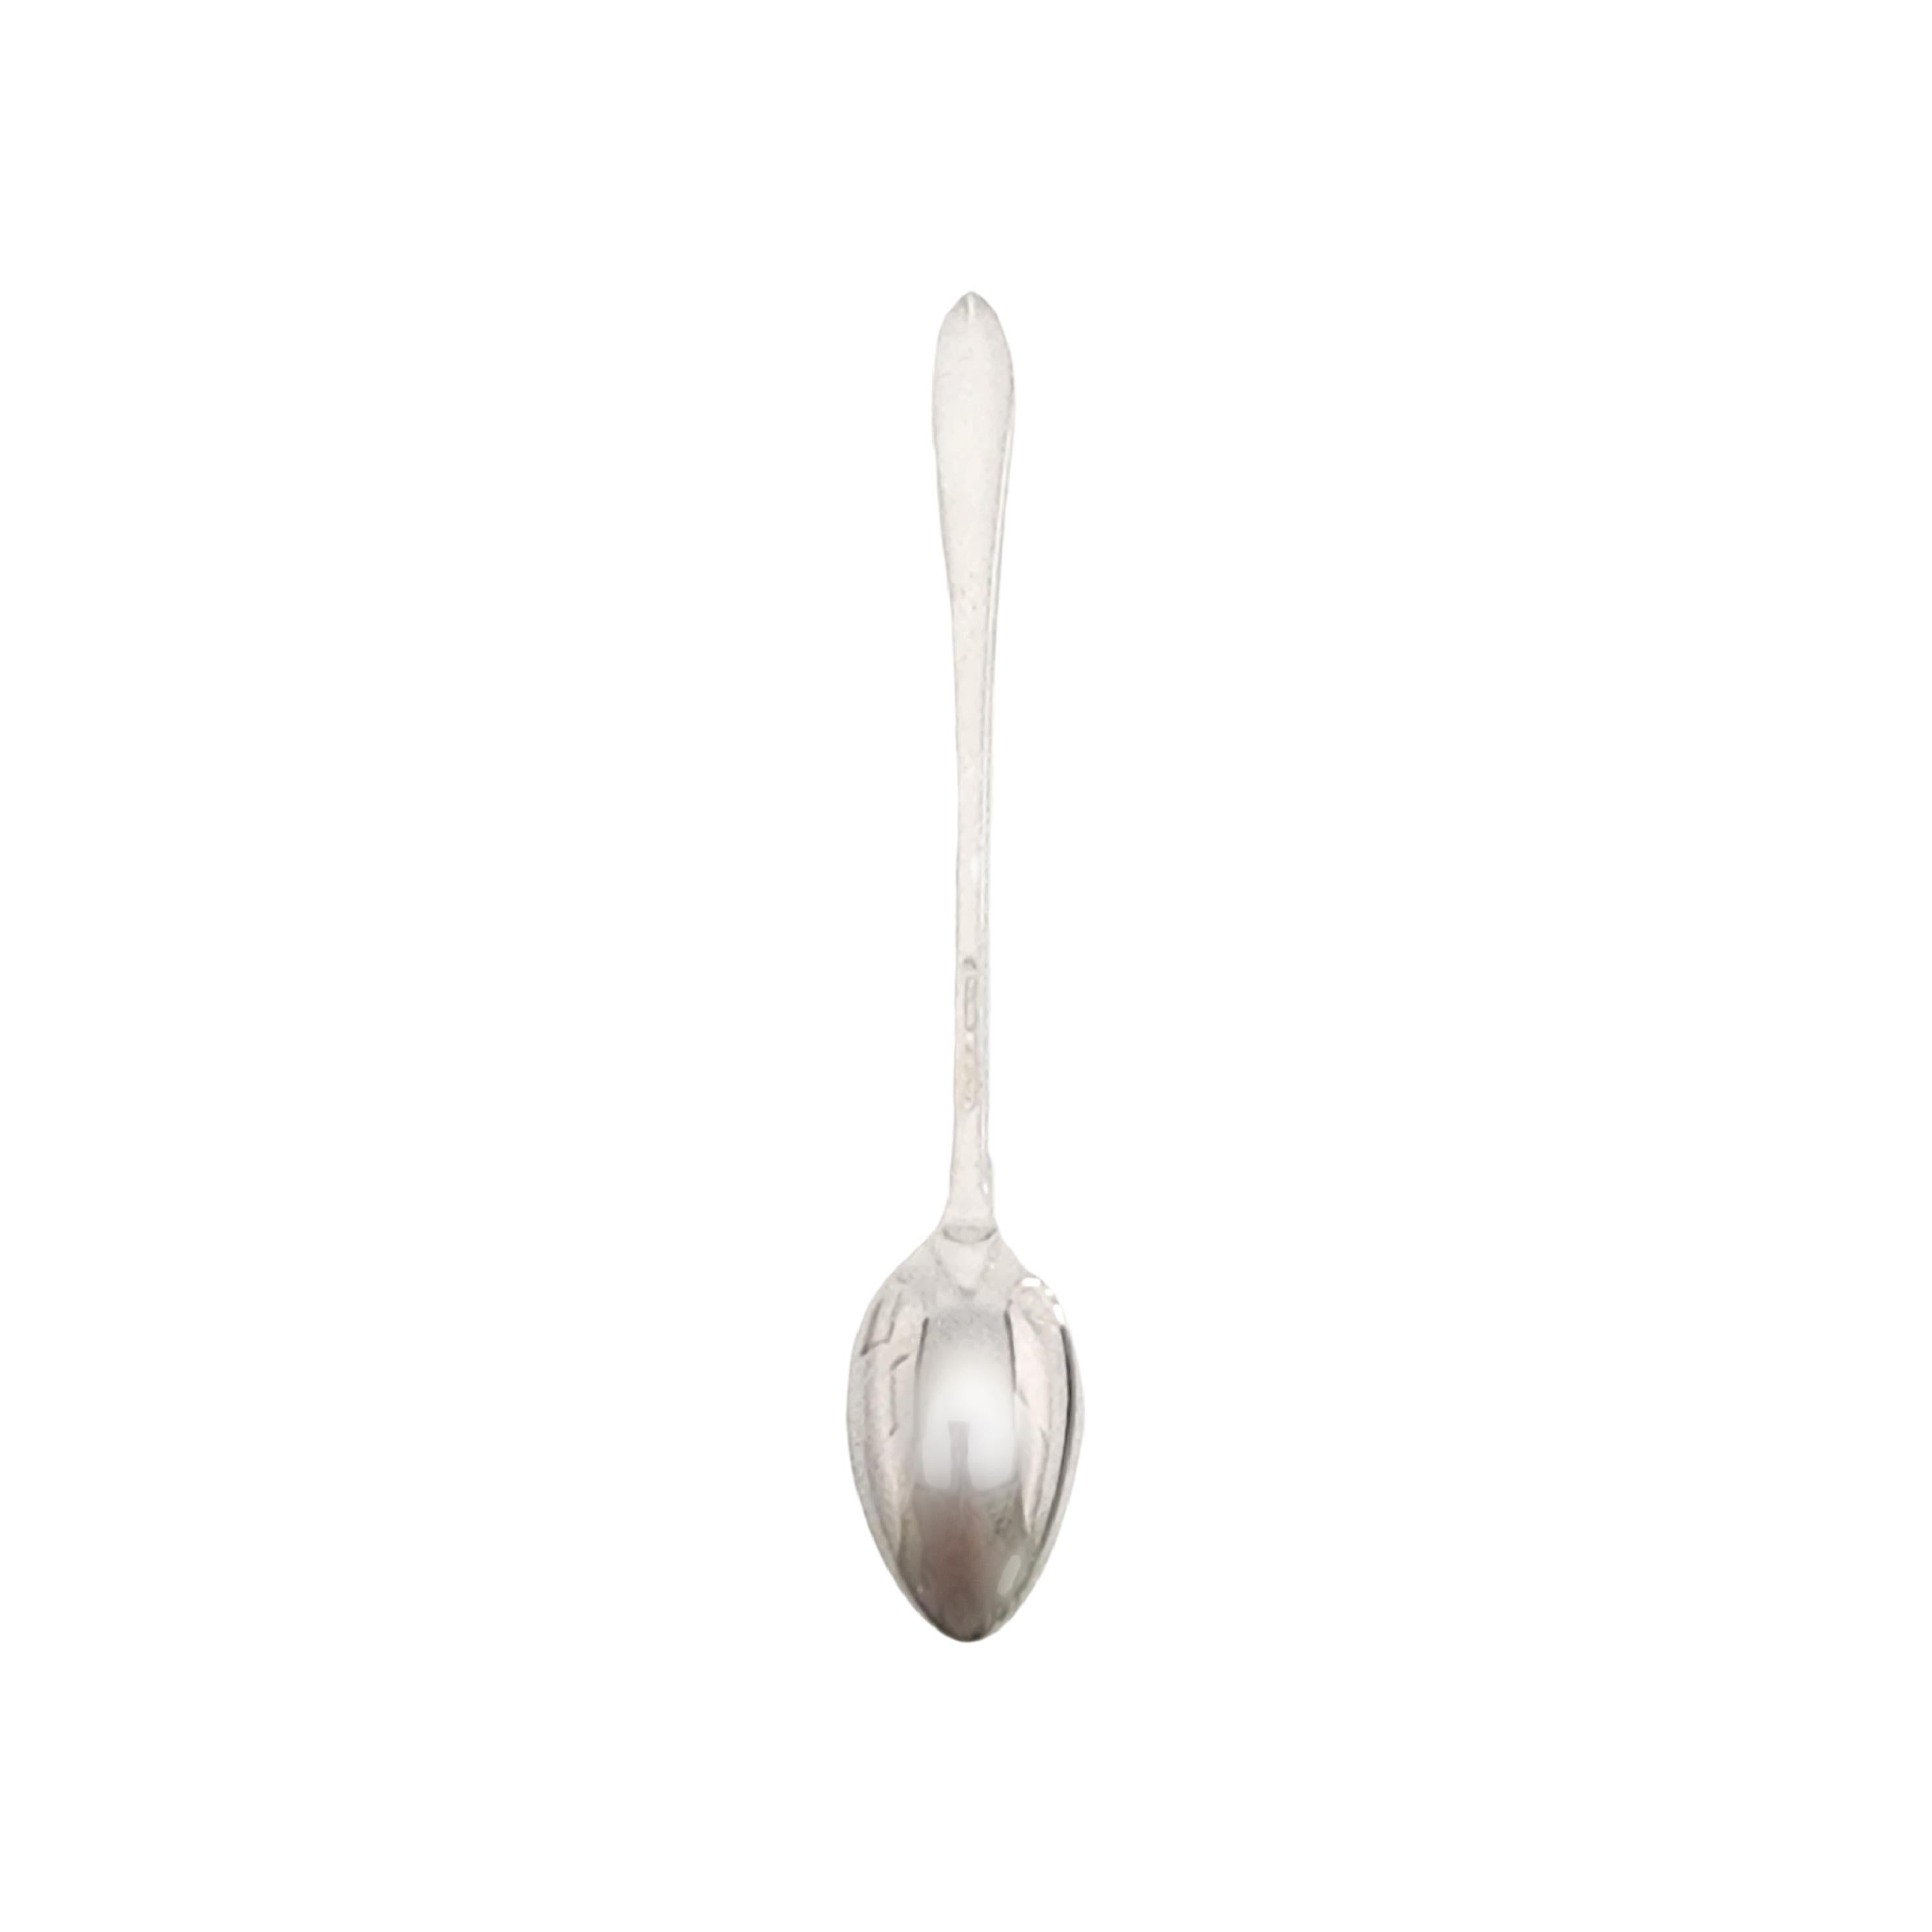 Tiffany & Co. Sterling Silver Faneuil Baby Feeding Spoon with Pouch 3